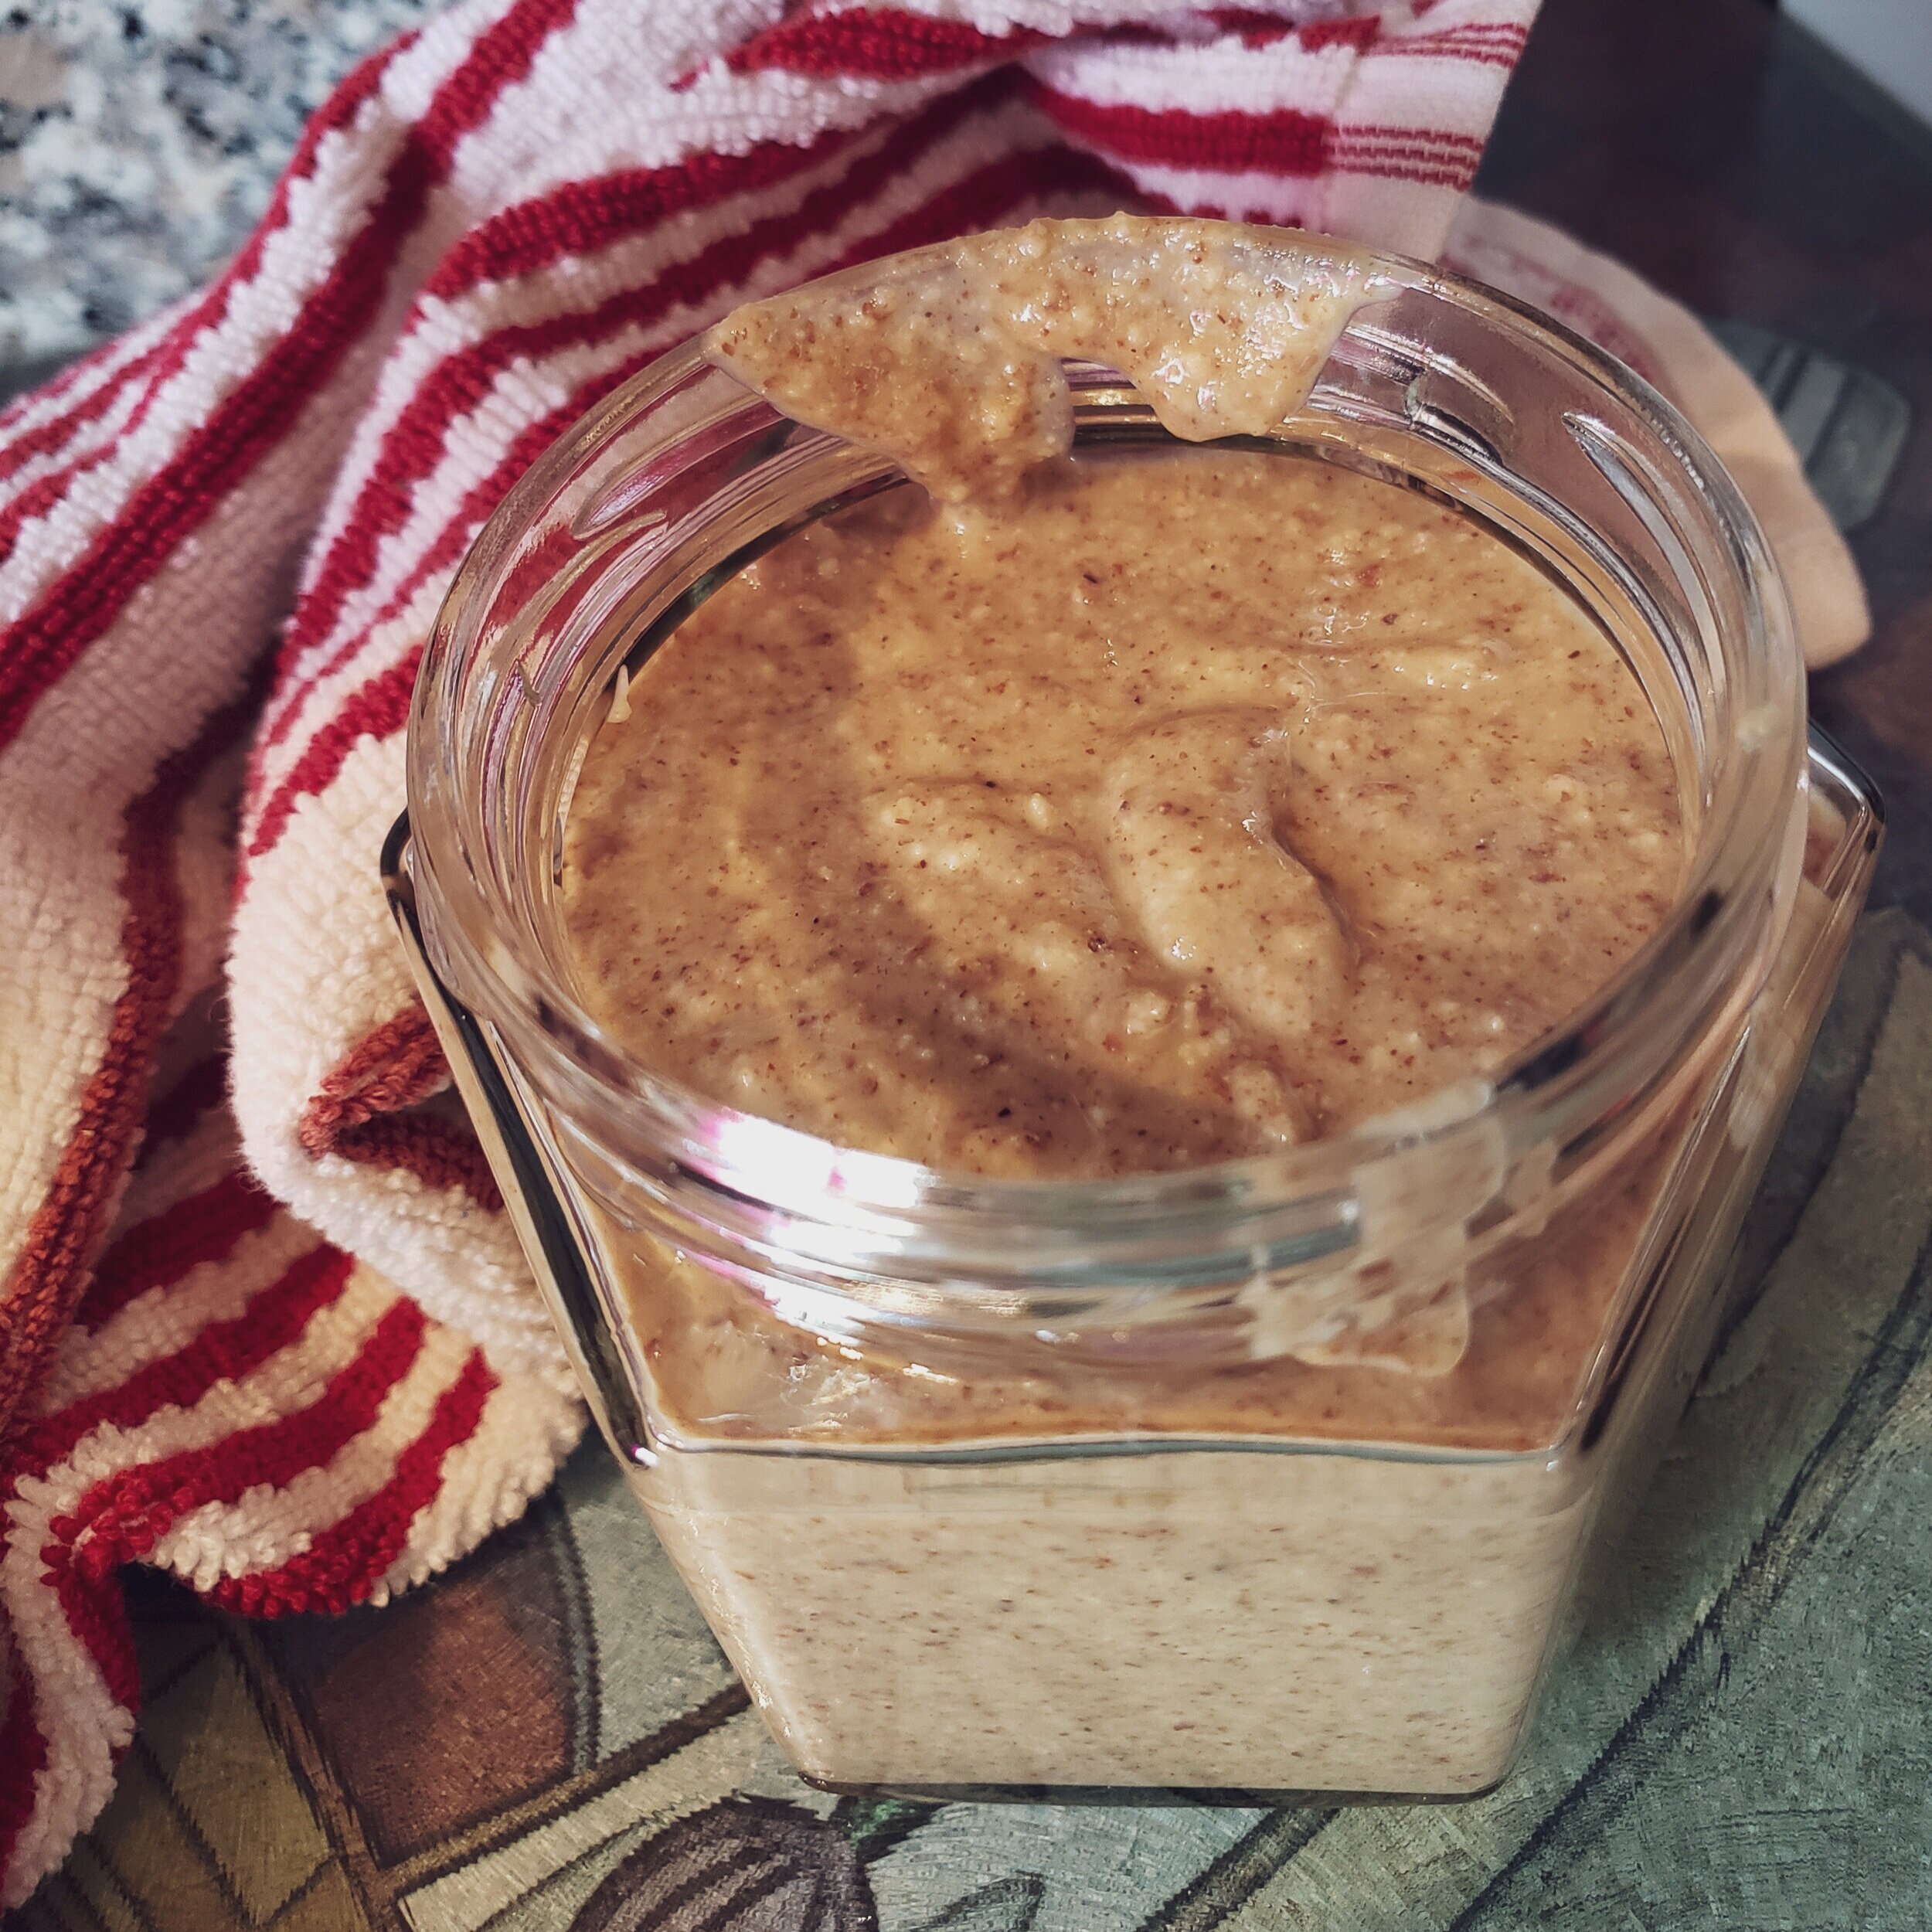 Healthy Homemade All Natural Peanut Butter